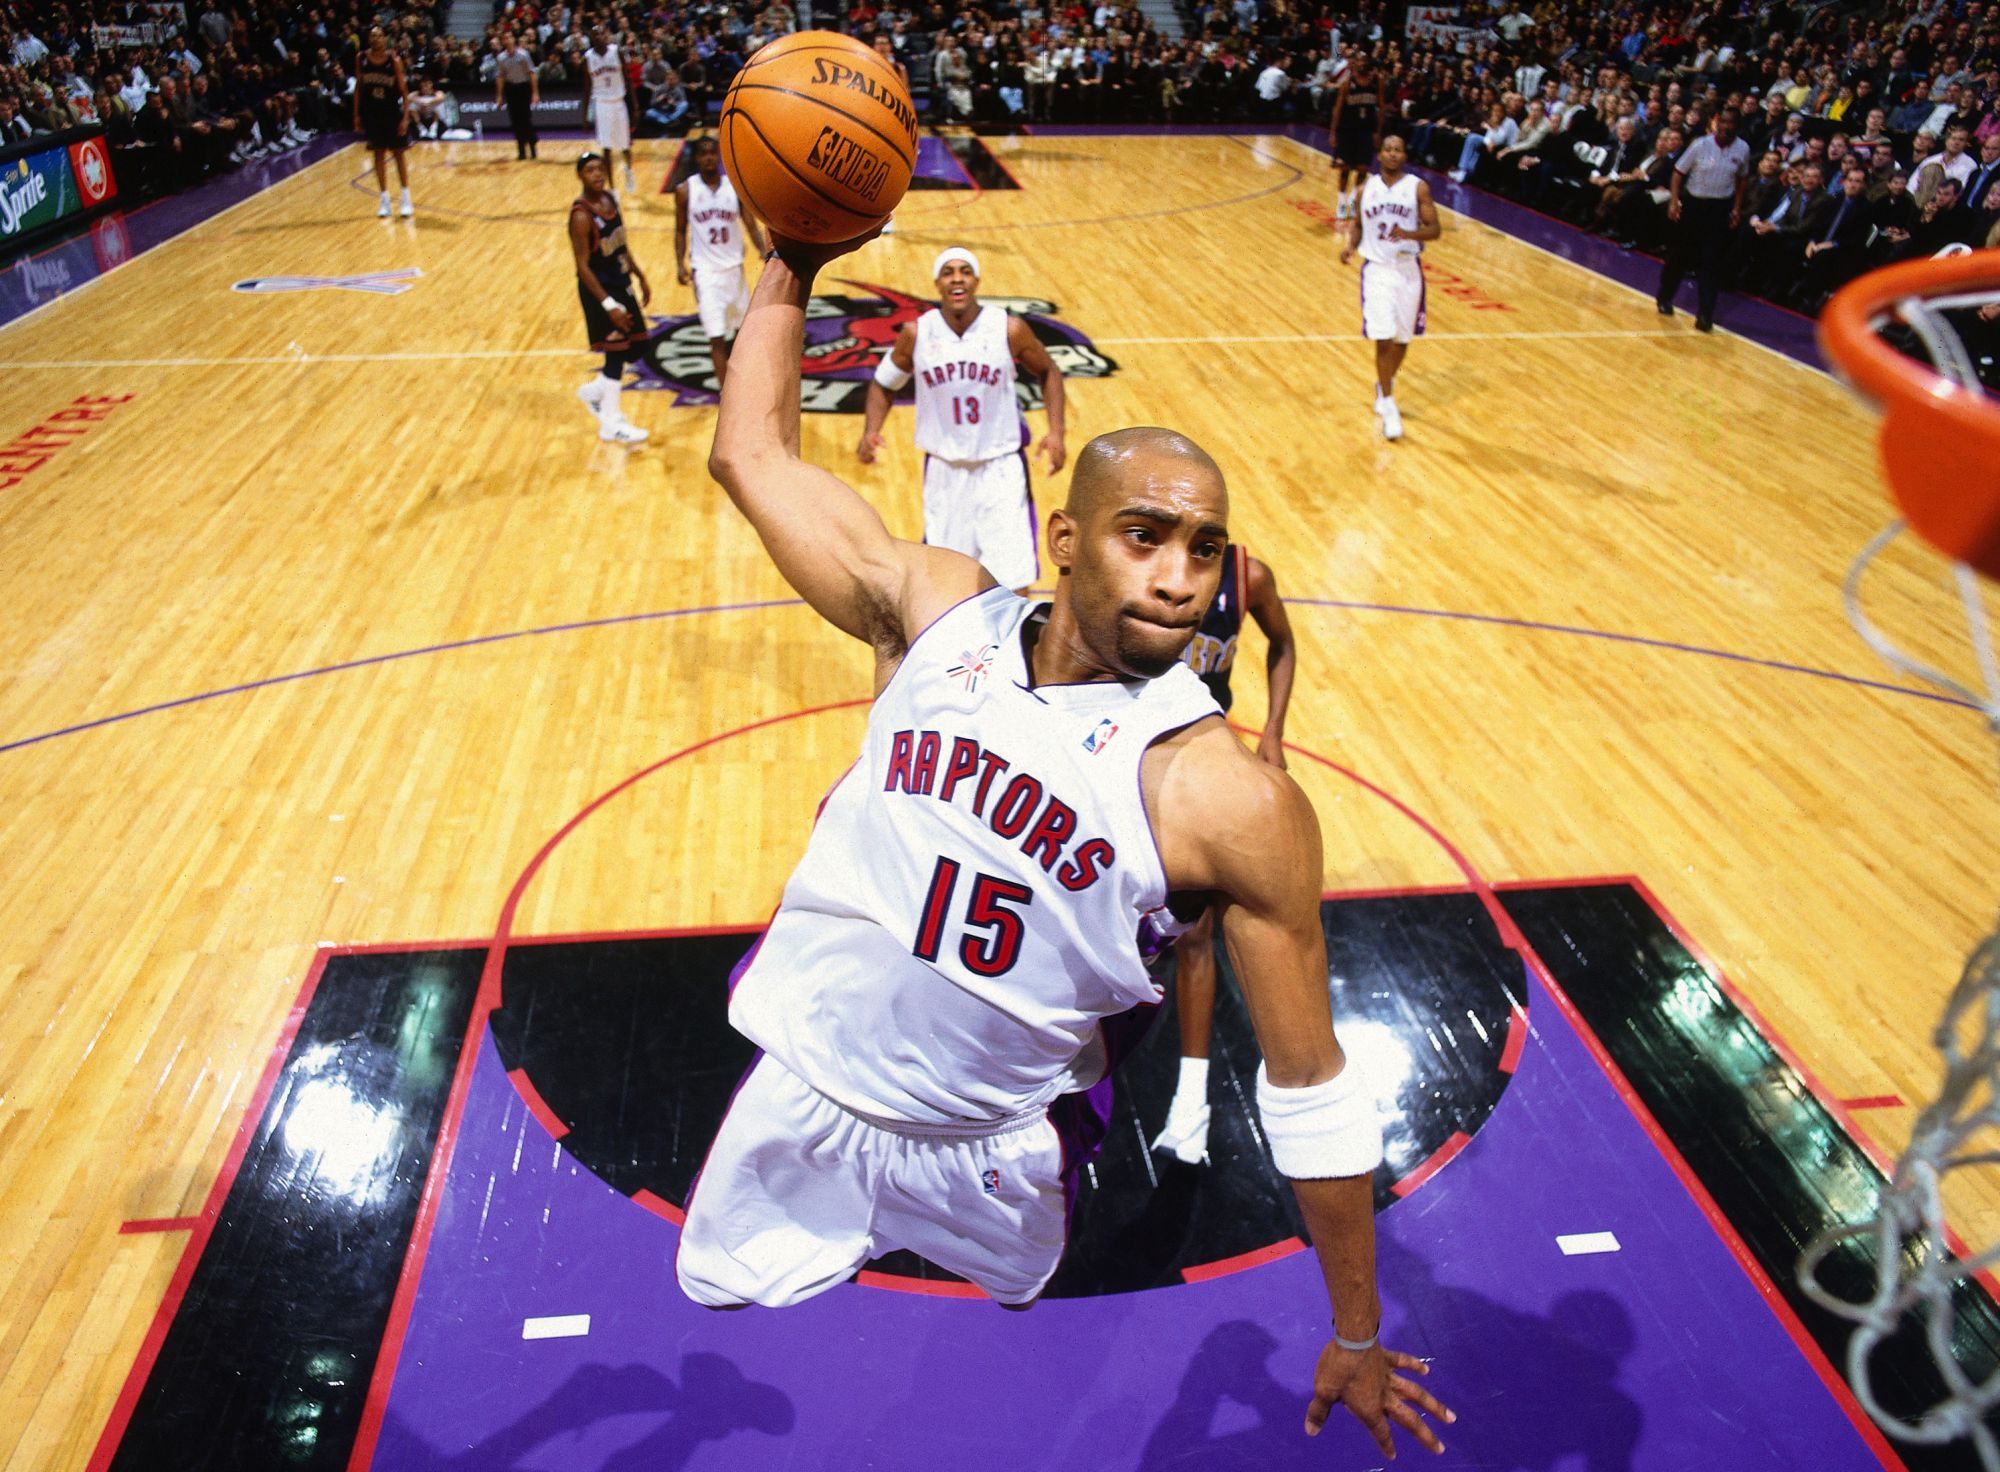 Vince Carter owned the dunk world 15 years ago